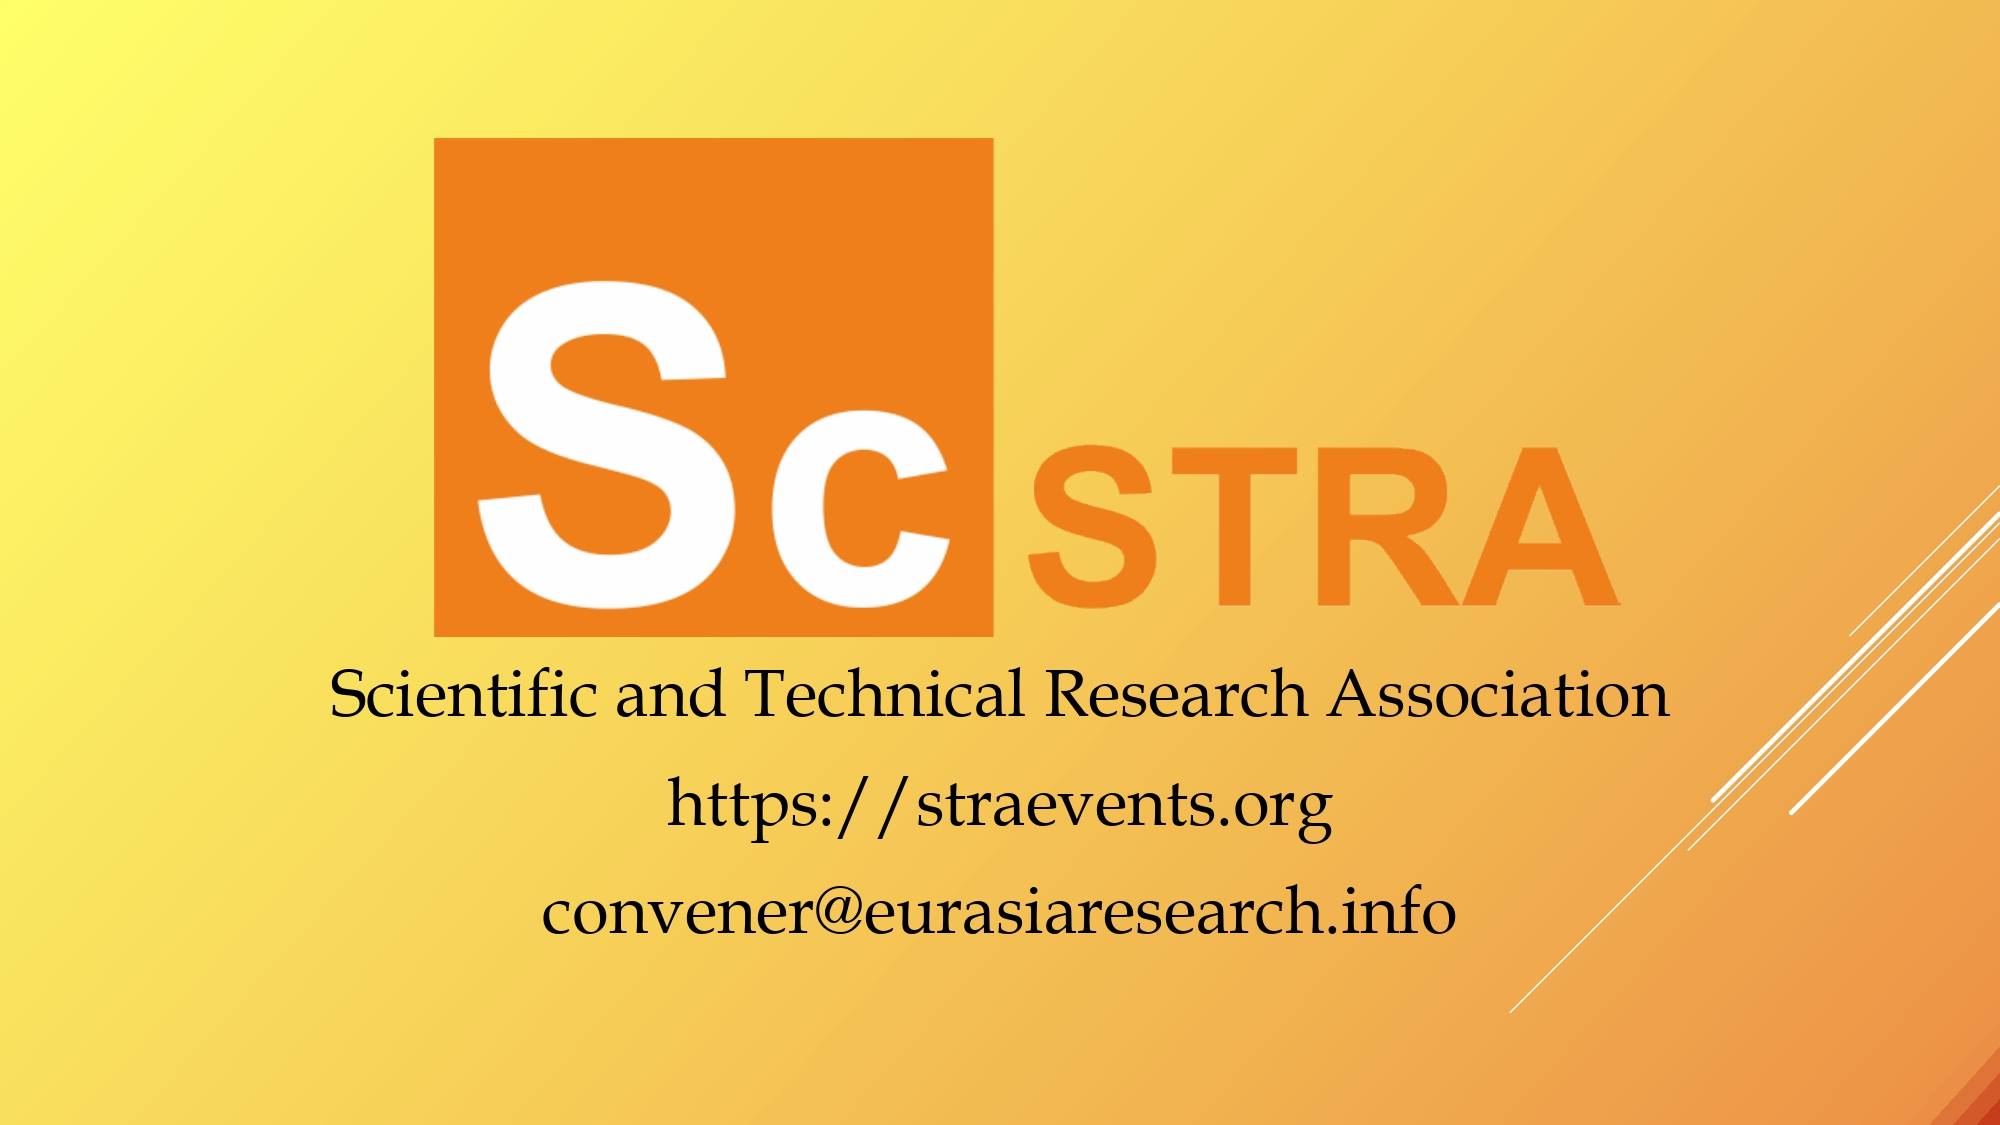 6th ICSTR London – International Conference on Science & Technology Research, 09-10 September 2021, London, United Kingdom